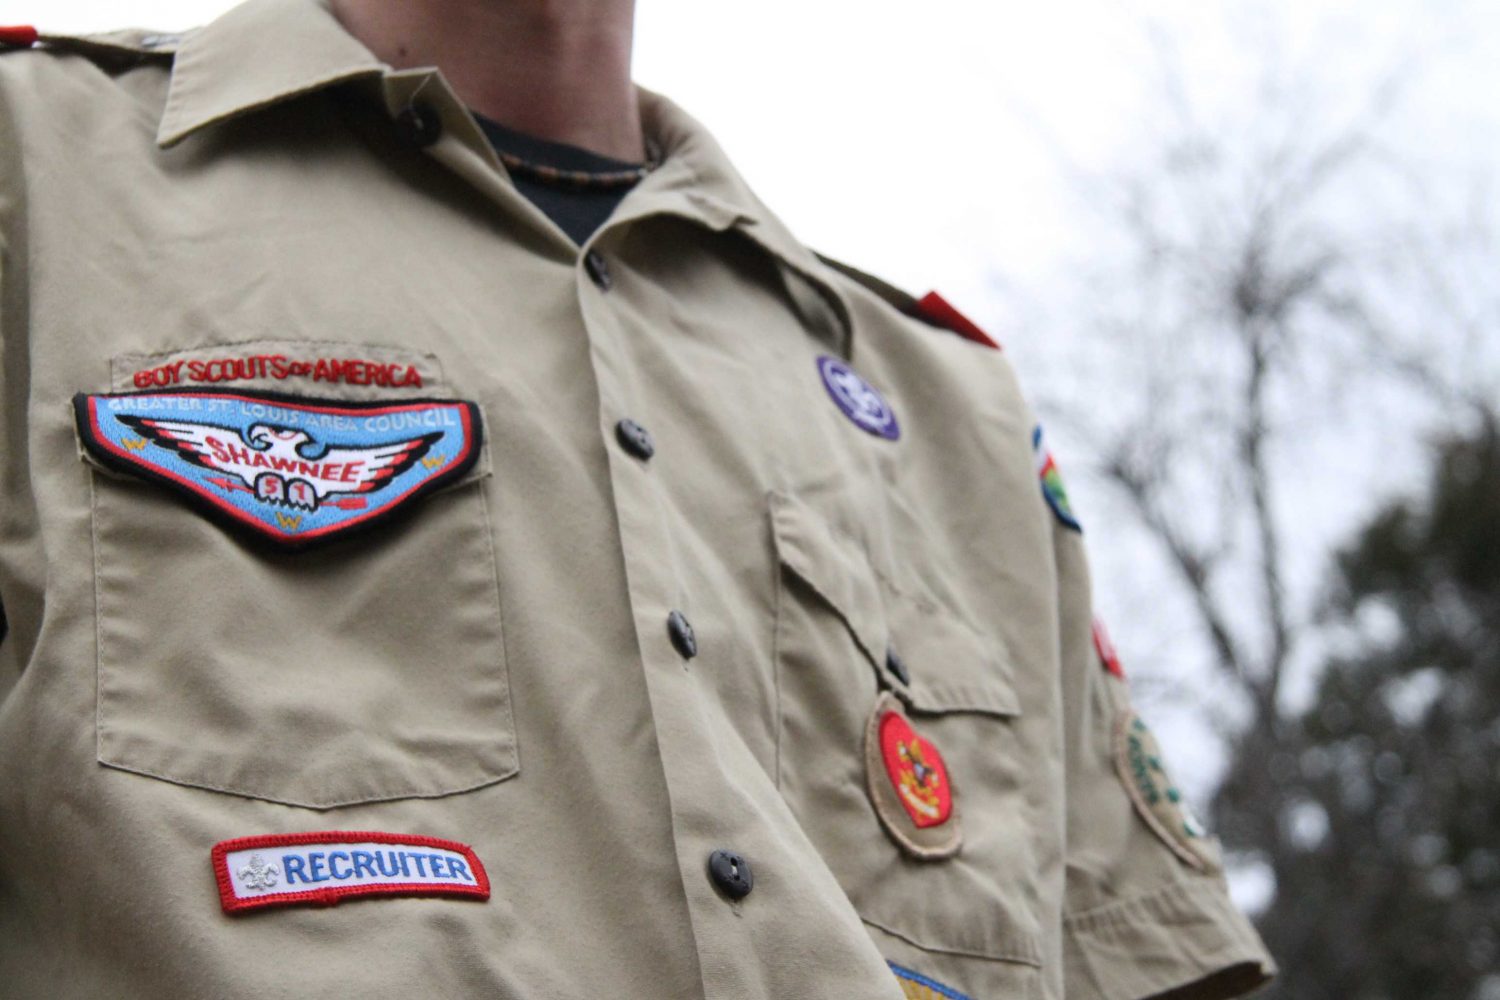 Scouting is not just for kids anymore